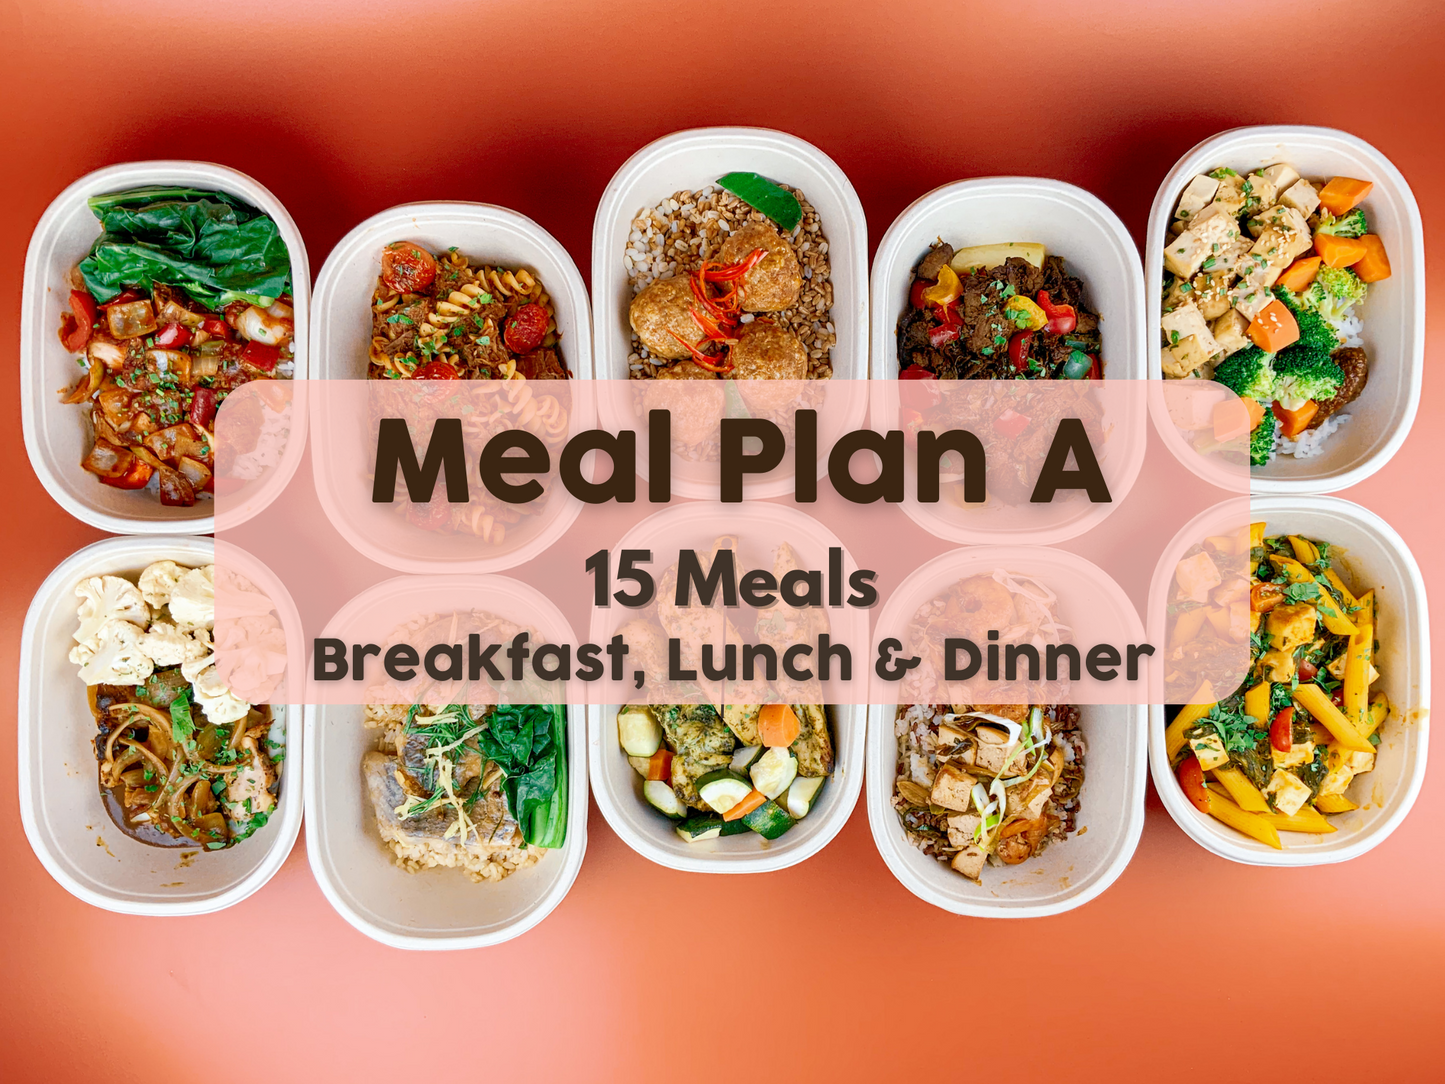 16th - 20th October Meal Plan A